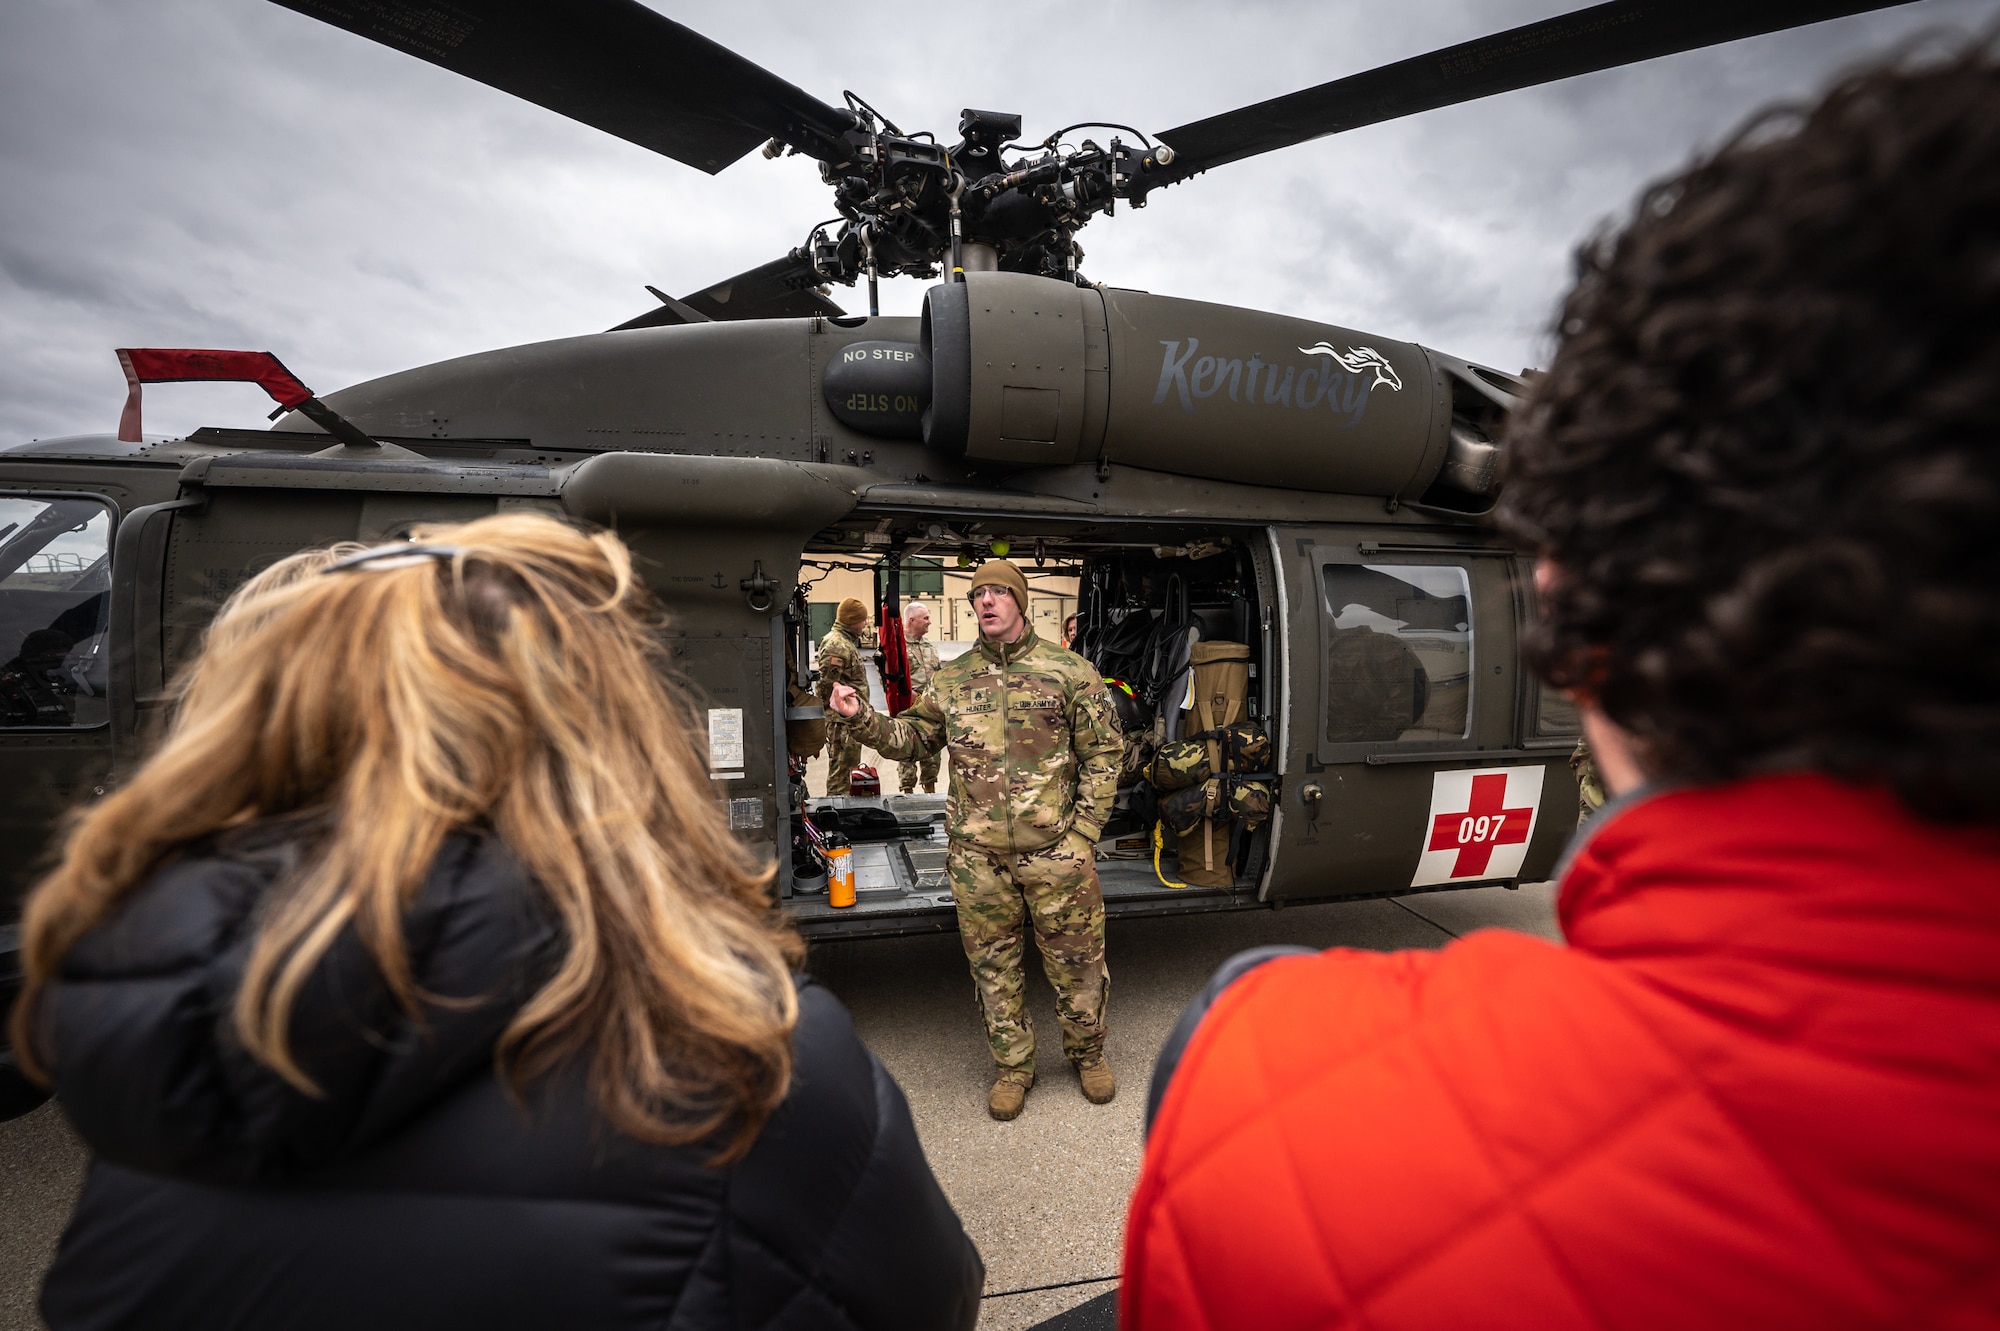 U.S. Army Staff Sgt. Ryan Hunter, a medic from the Kentucky Army National Guard’s 63rd Theater Aviation Brigade, briefs staff members from Kentucky’s Congressional Delegation about unit capabilities Feb. 17, 2023, at the Kentucky Air National Guard Base in Louisville, Ky. The staffers were touring the base to learn more about the mission sets of the Kentucky National Guard. (U.S. Air National Guard photo by Dale Greer)